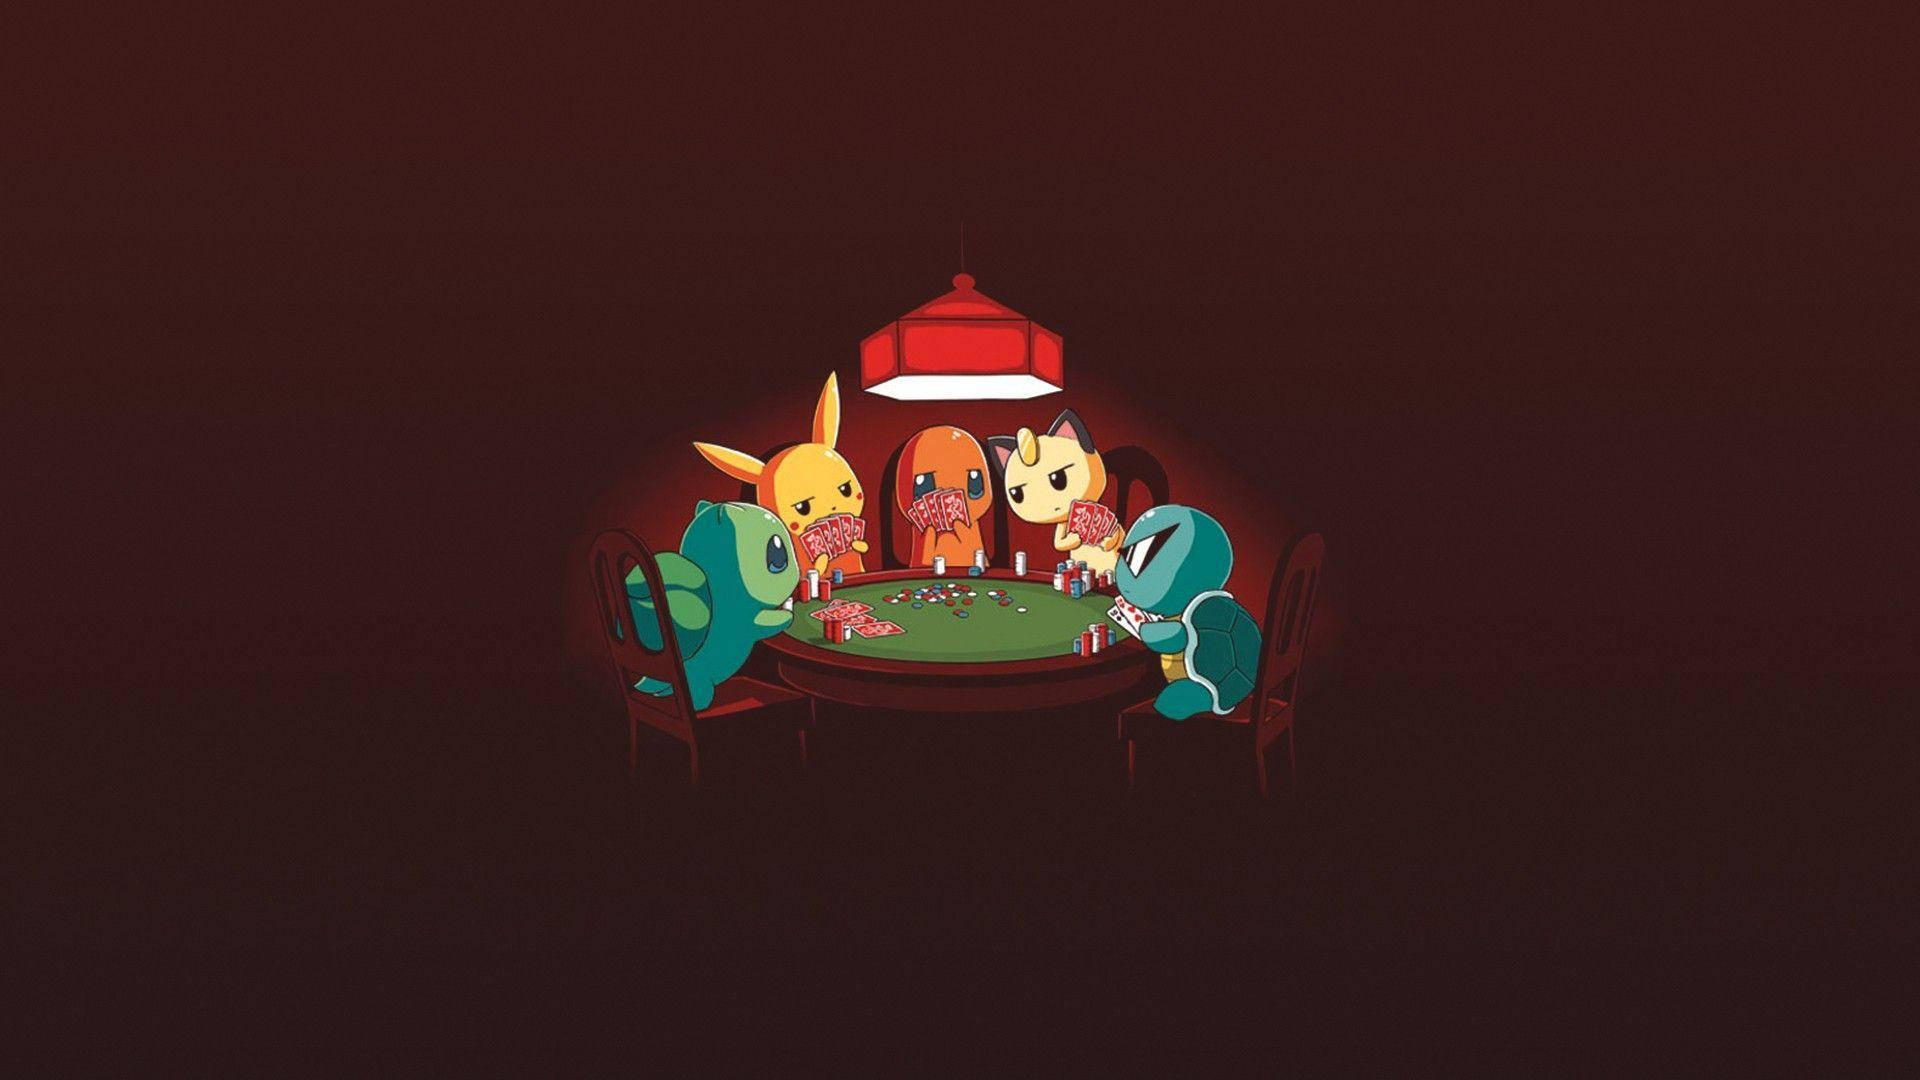 Pikachu And Meowth Playing Card Games Wallpaper